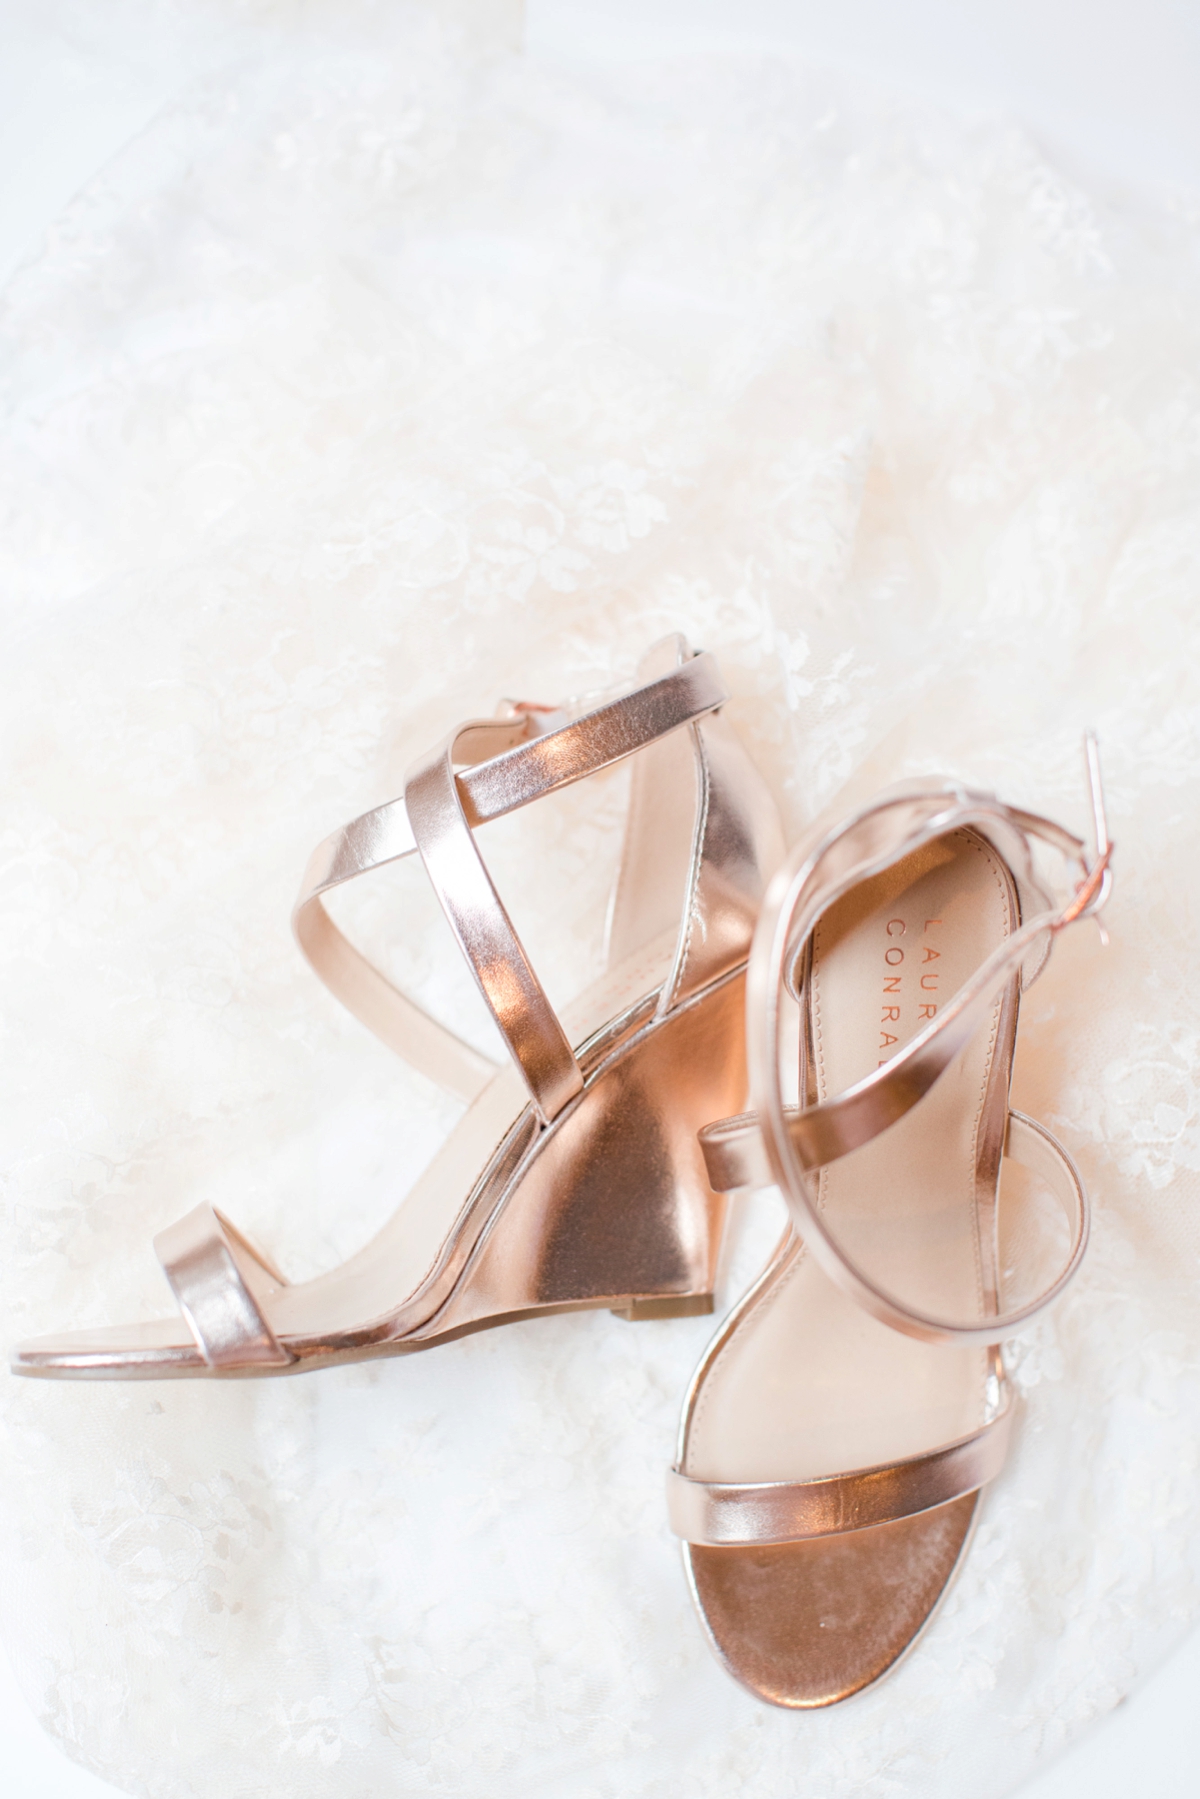 LC Lauren Conrad Shoes | Cape Charles Wedding Photography by Angie McPherson Photography